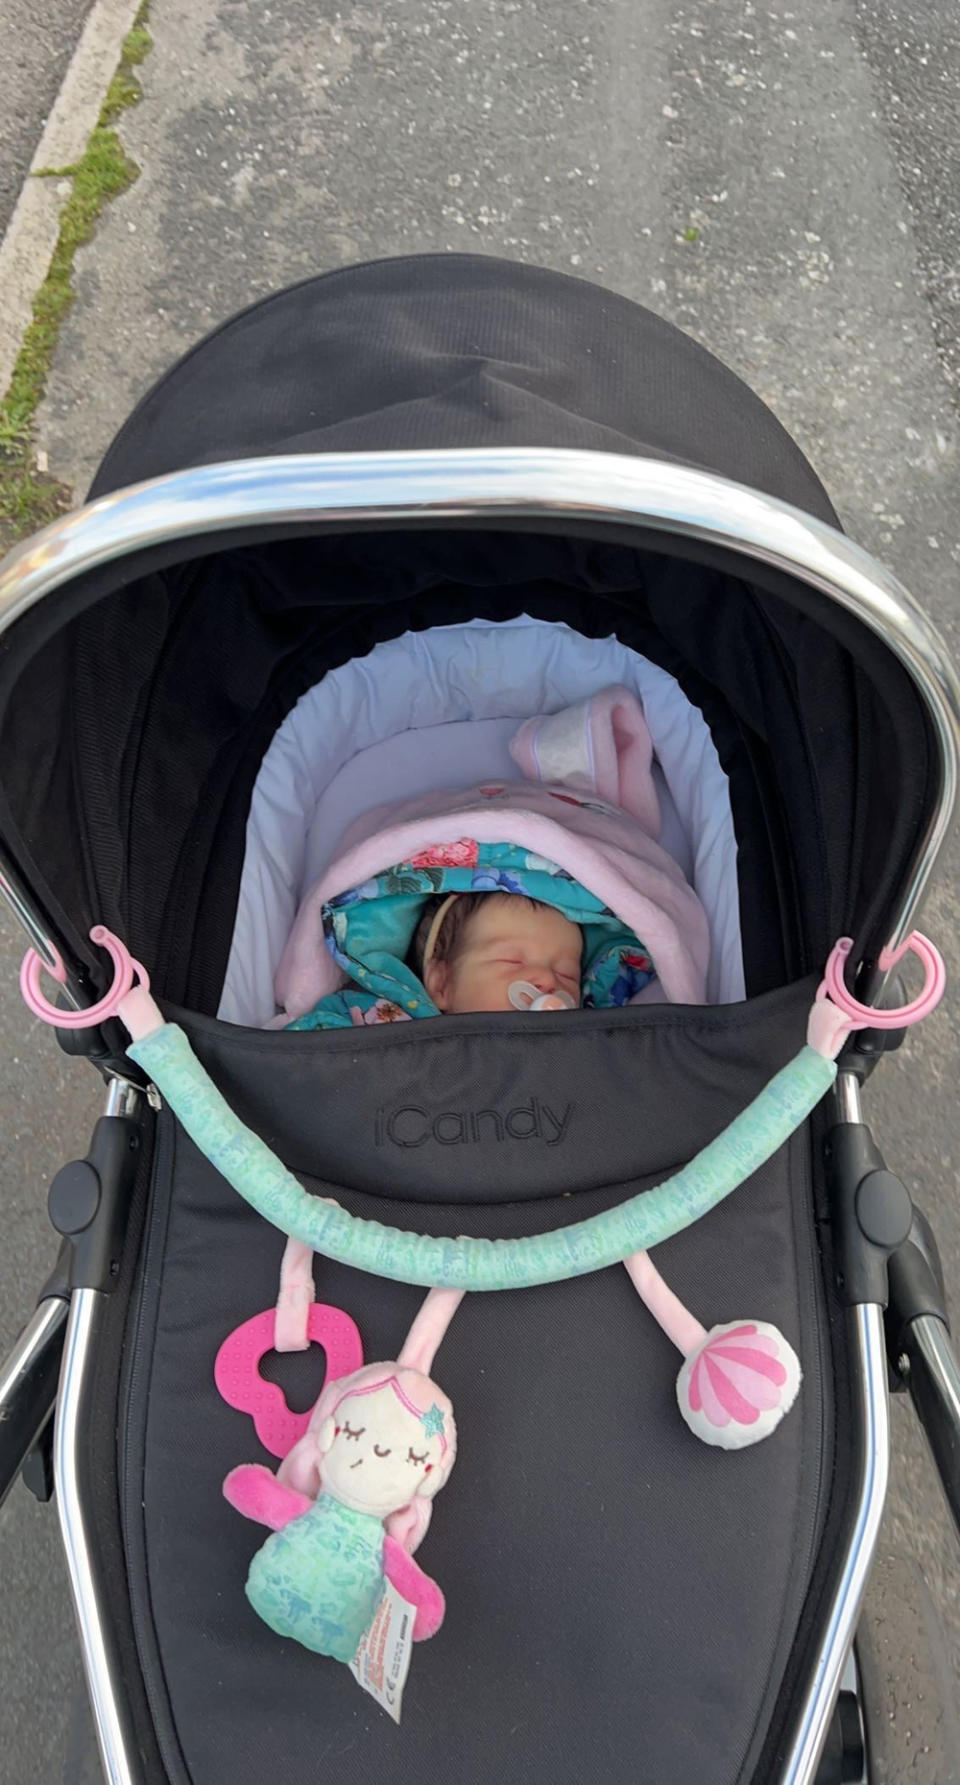 Natasha Harridge, 23, enjoying a walk with the stroller and her reborn baby (Collect/PA Real Life)